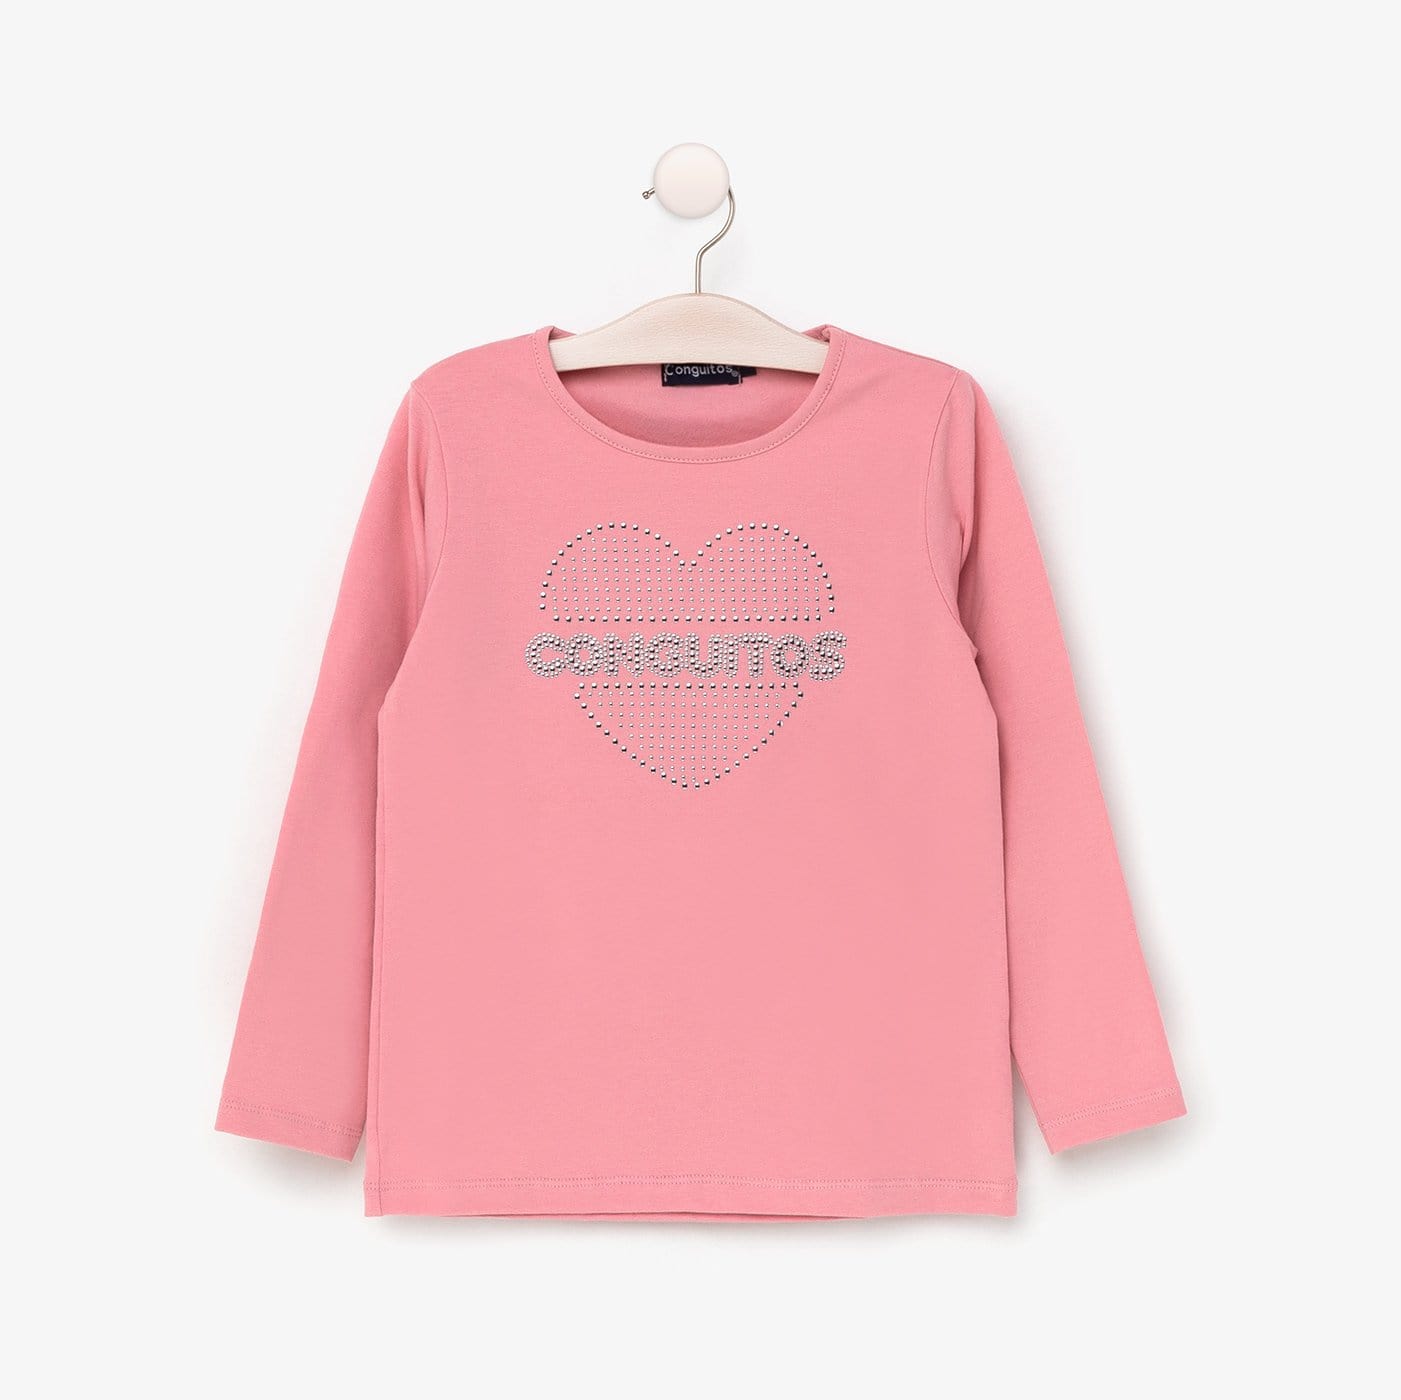 CONGUITOS TEXTIL Clothing Girl's Pink "Heart Strass" T-shirt